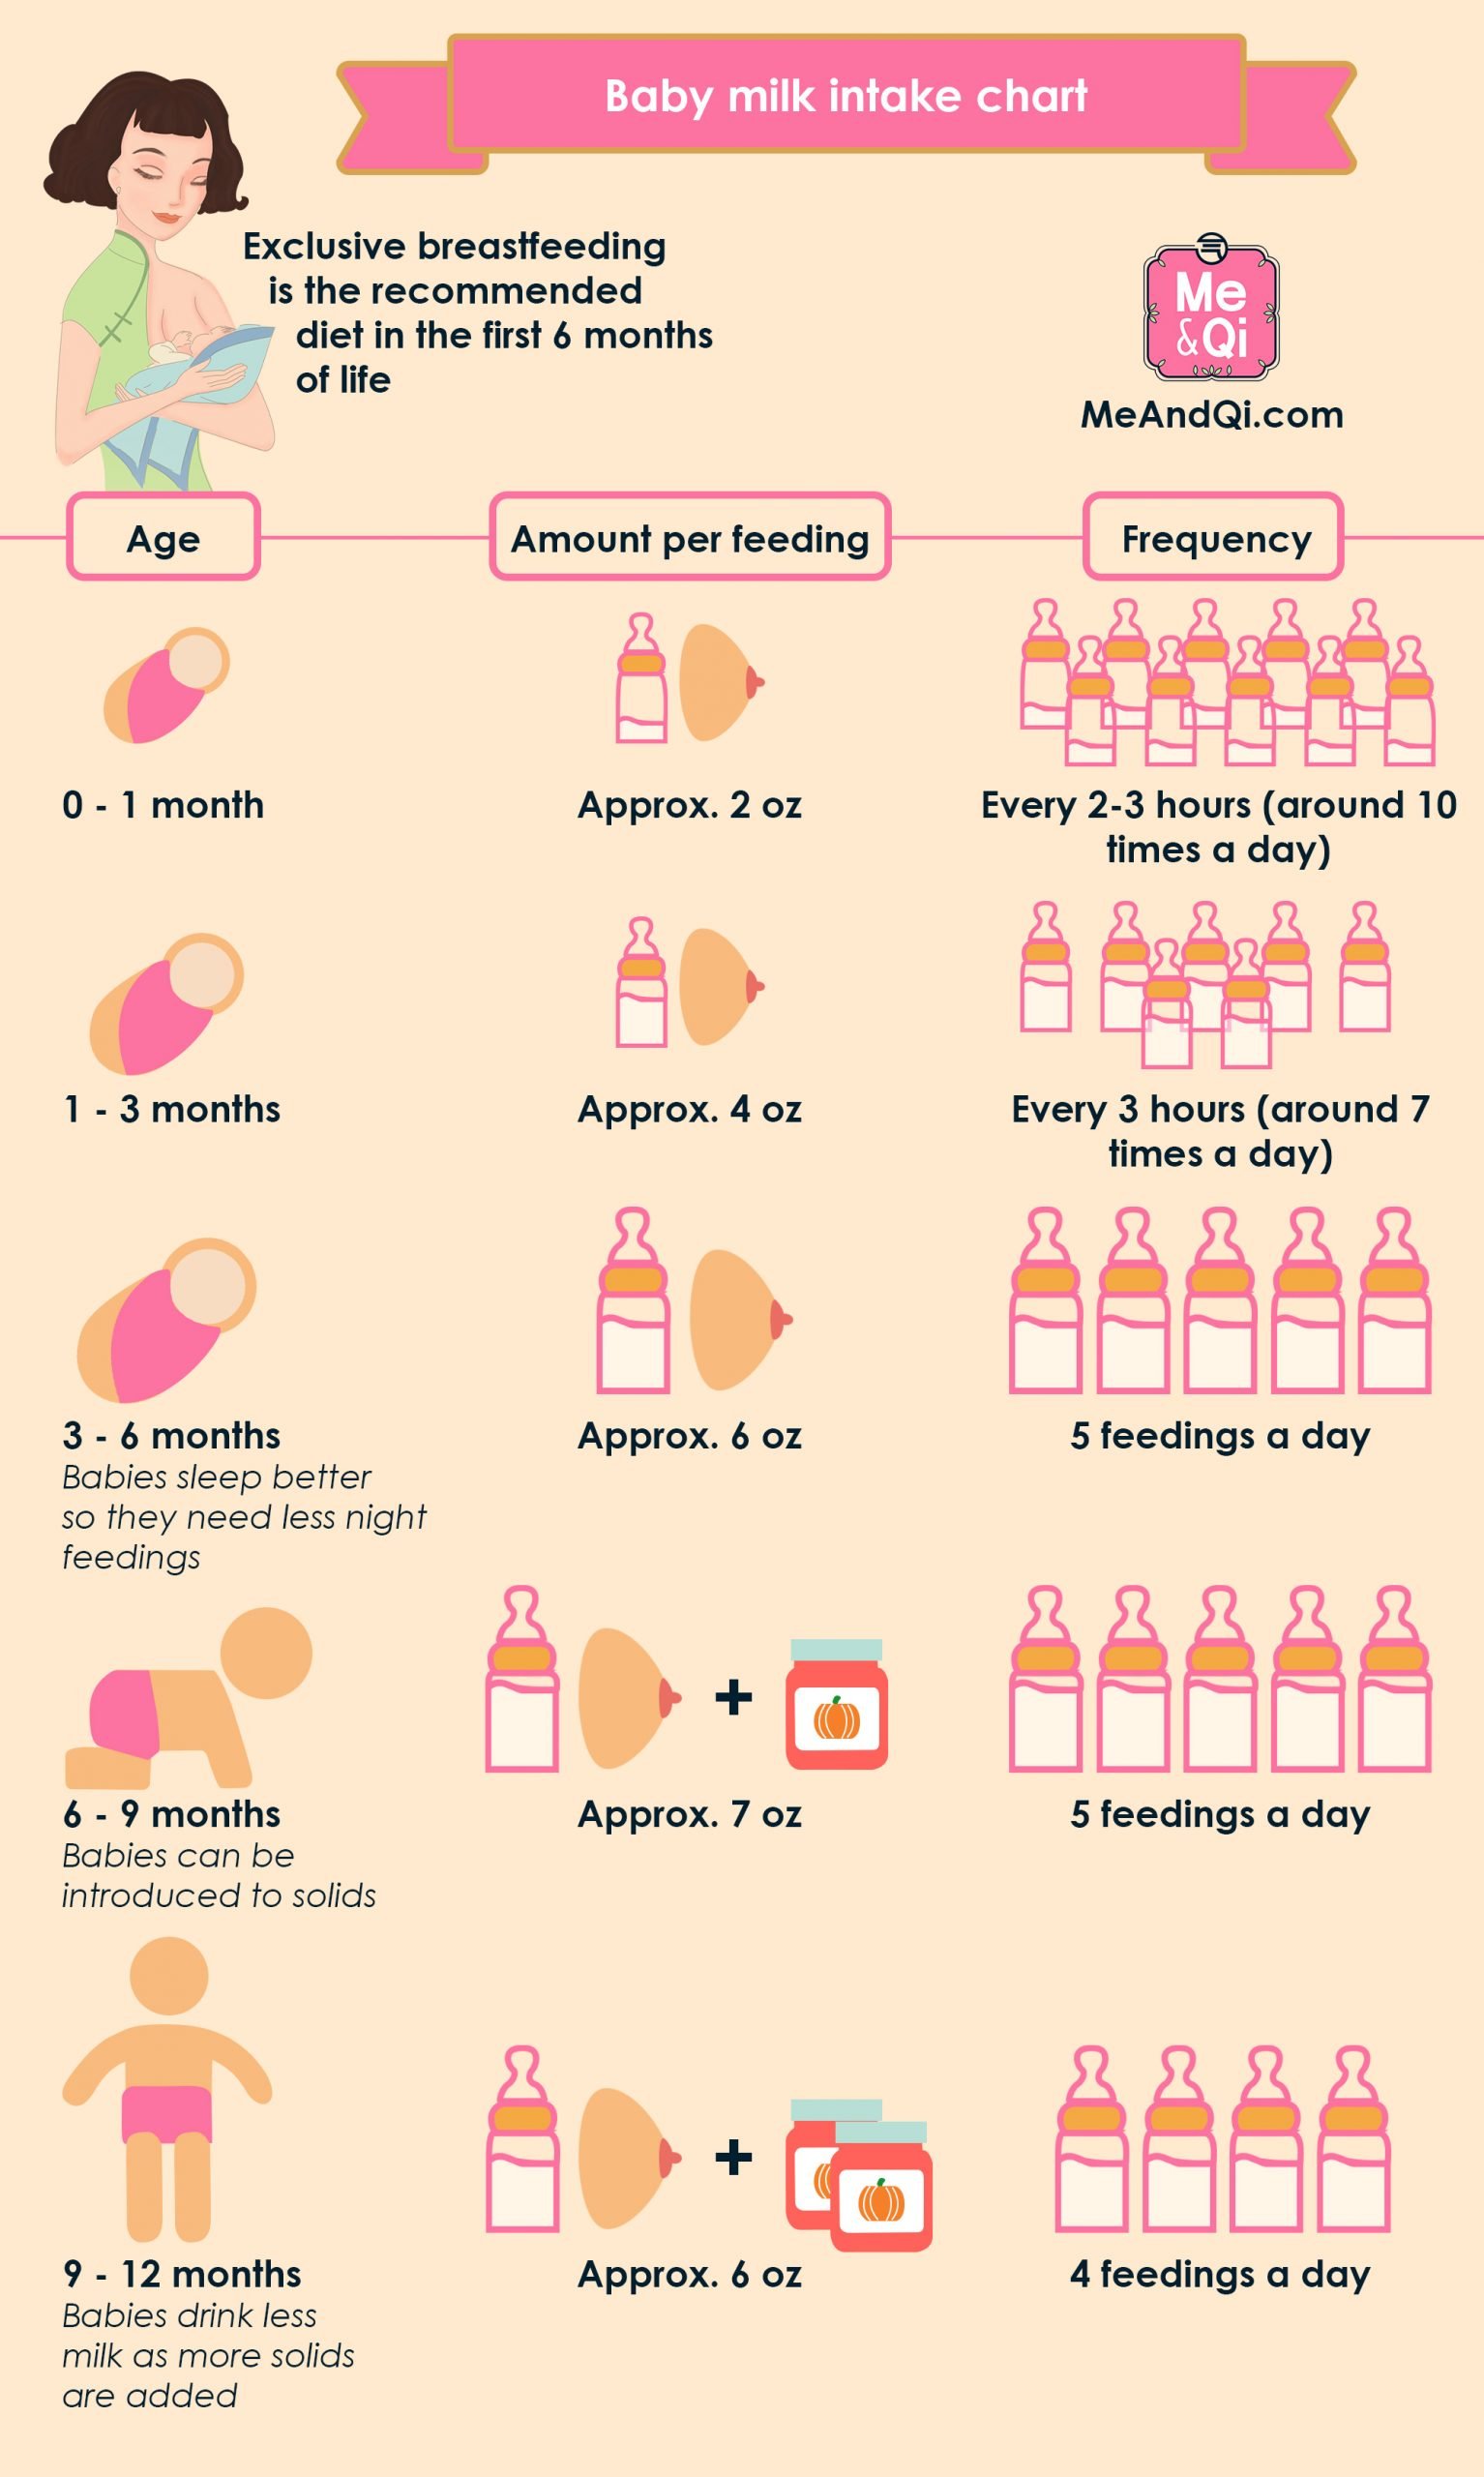 Baby milk intake charts: feeding guide by age